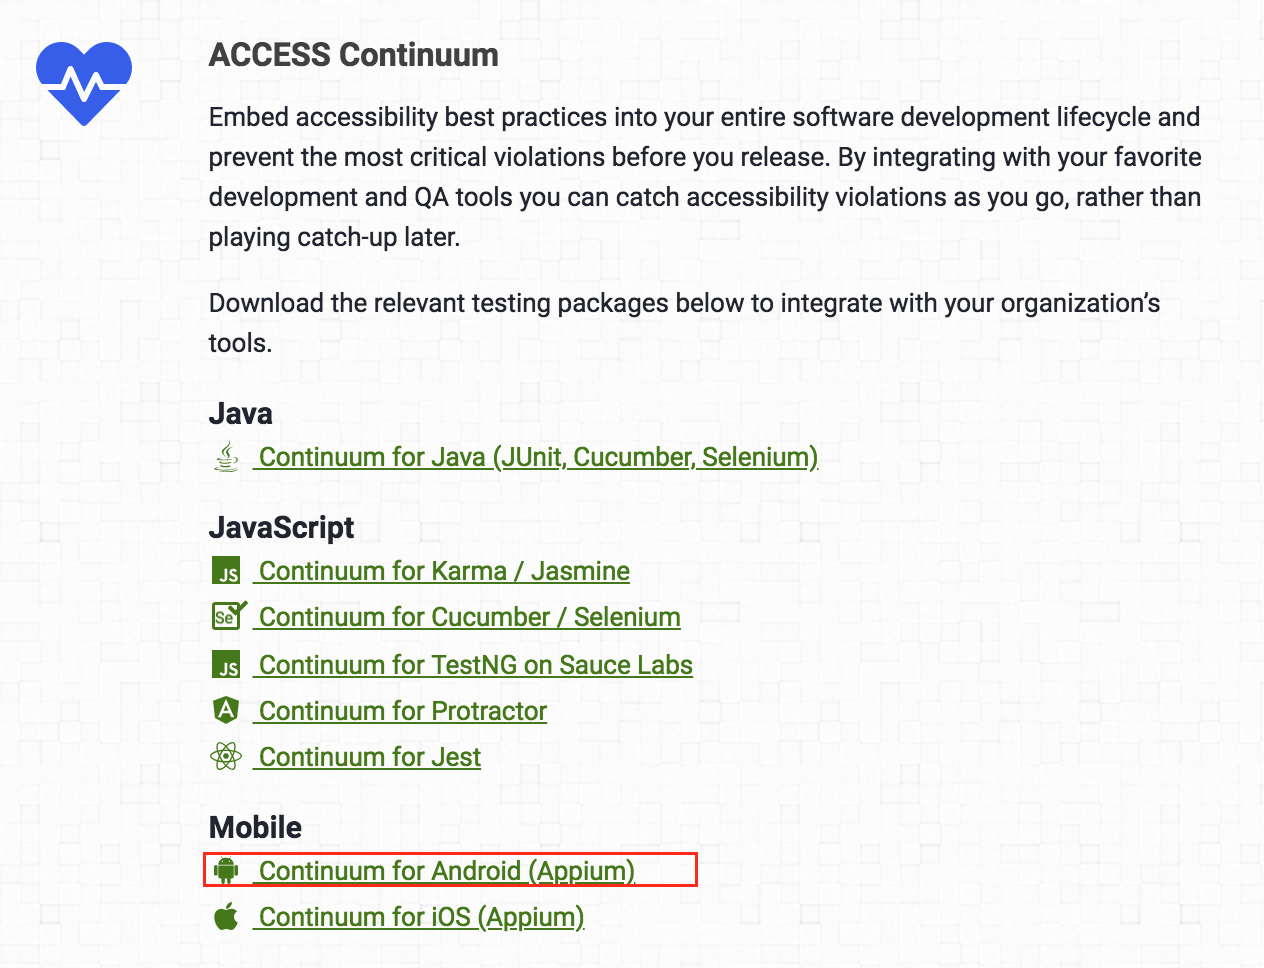 Continum for Android download in AMP Toolbox.